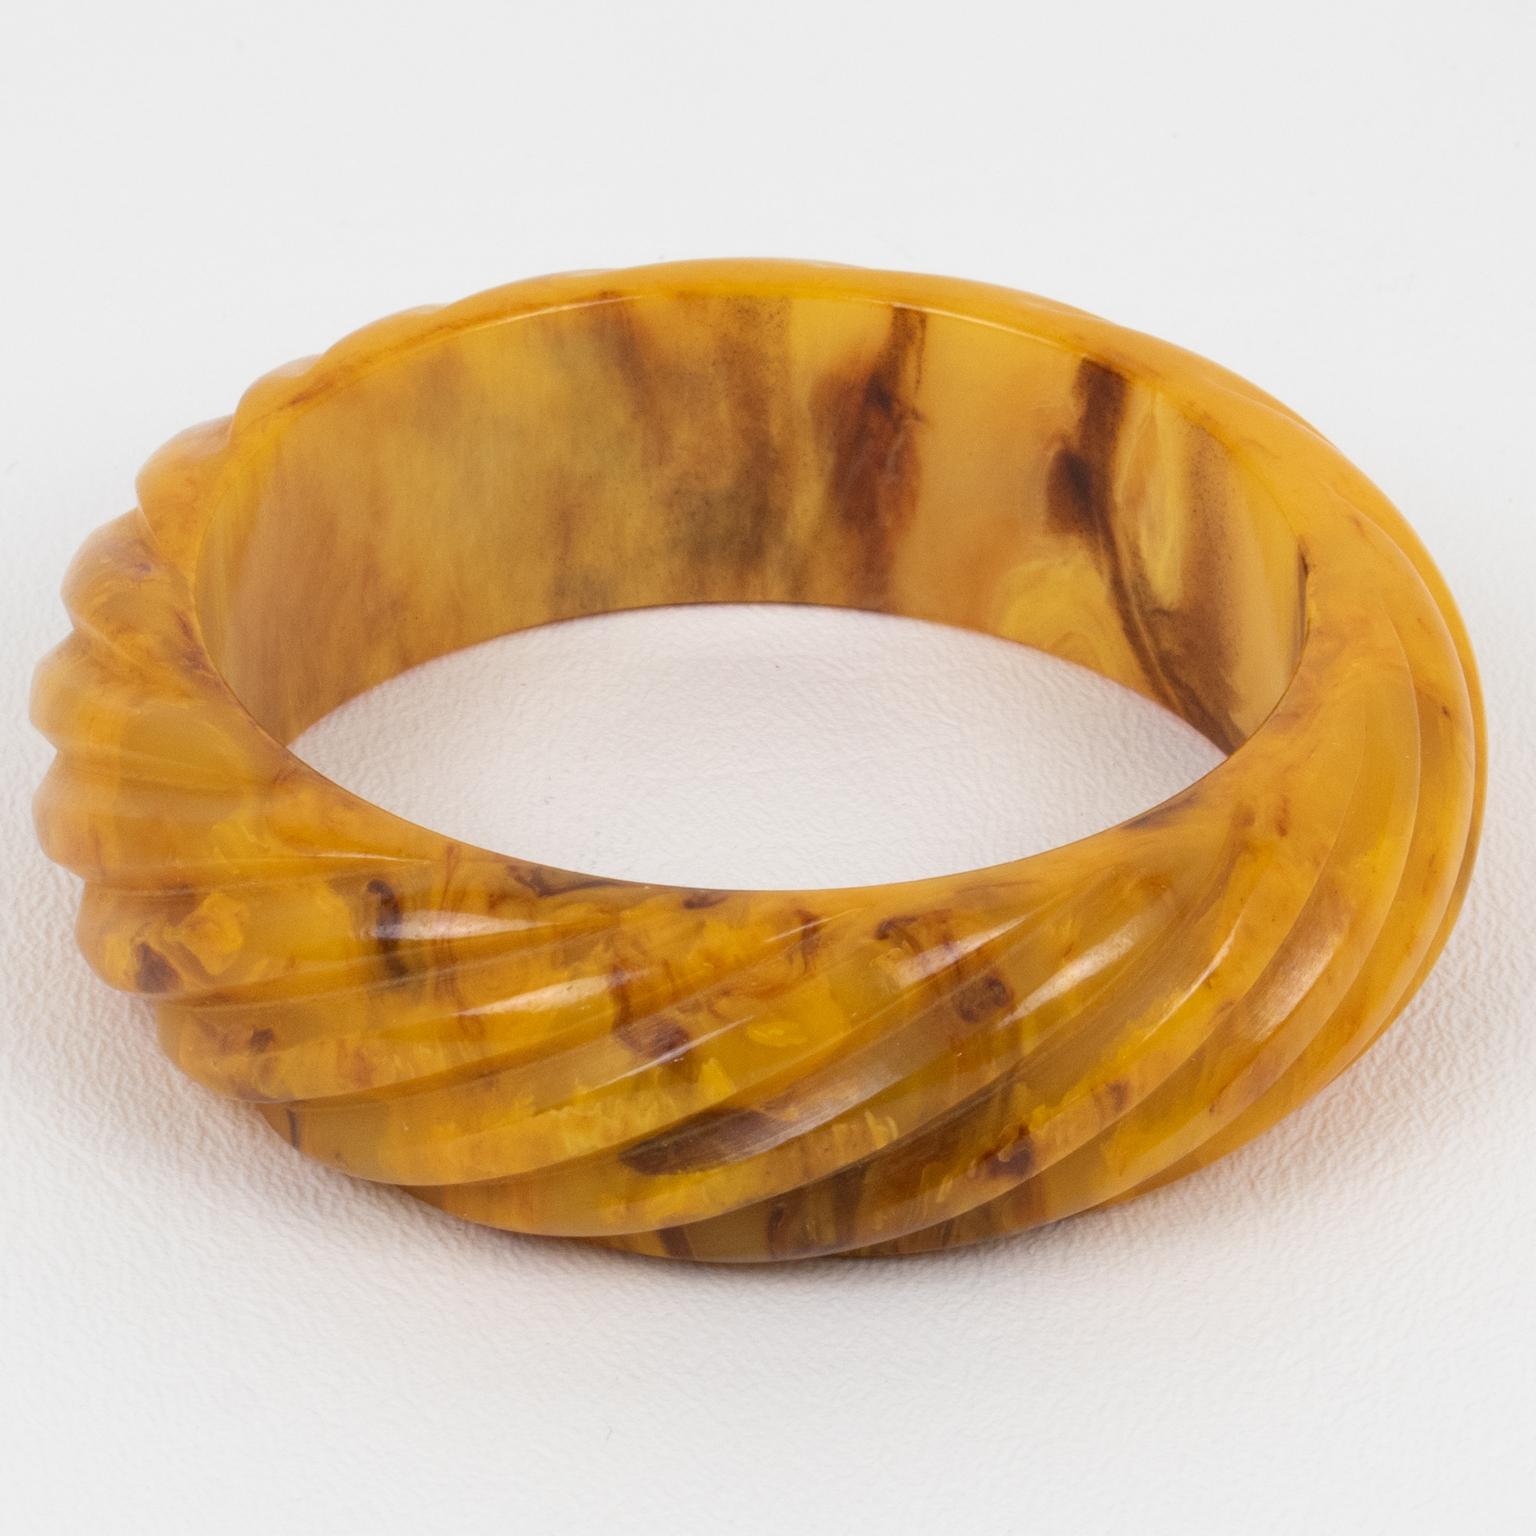 This incredible Mississippi Swamp marble Bakelite carved bracelet bangle features a chunky domed shape with deep geometric carving. Its bold and beautiful design displays stripes all around and a thick-walled pattern. The butterscotch marbled color